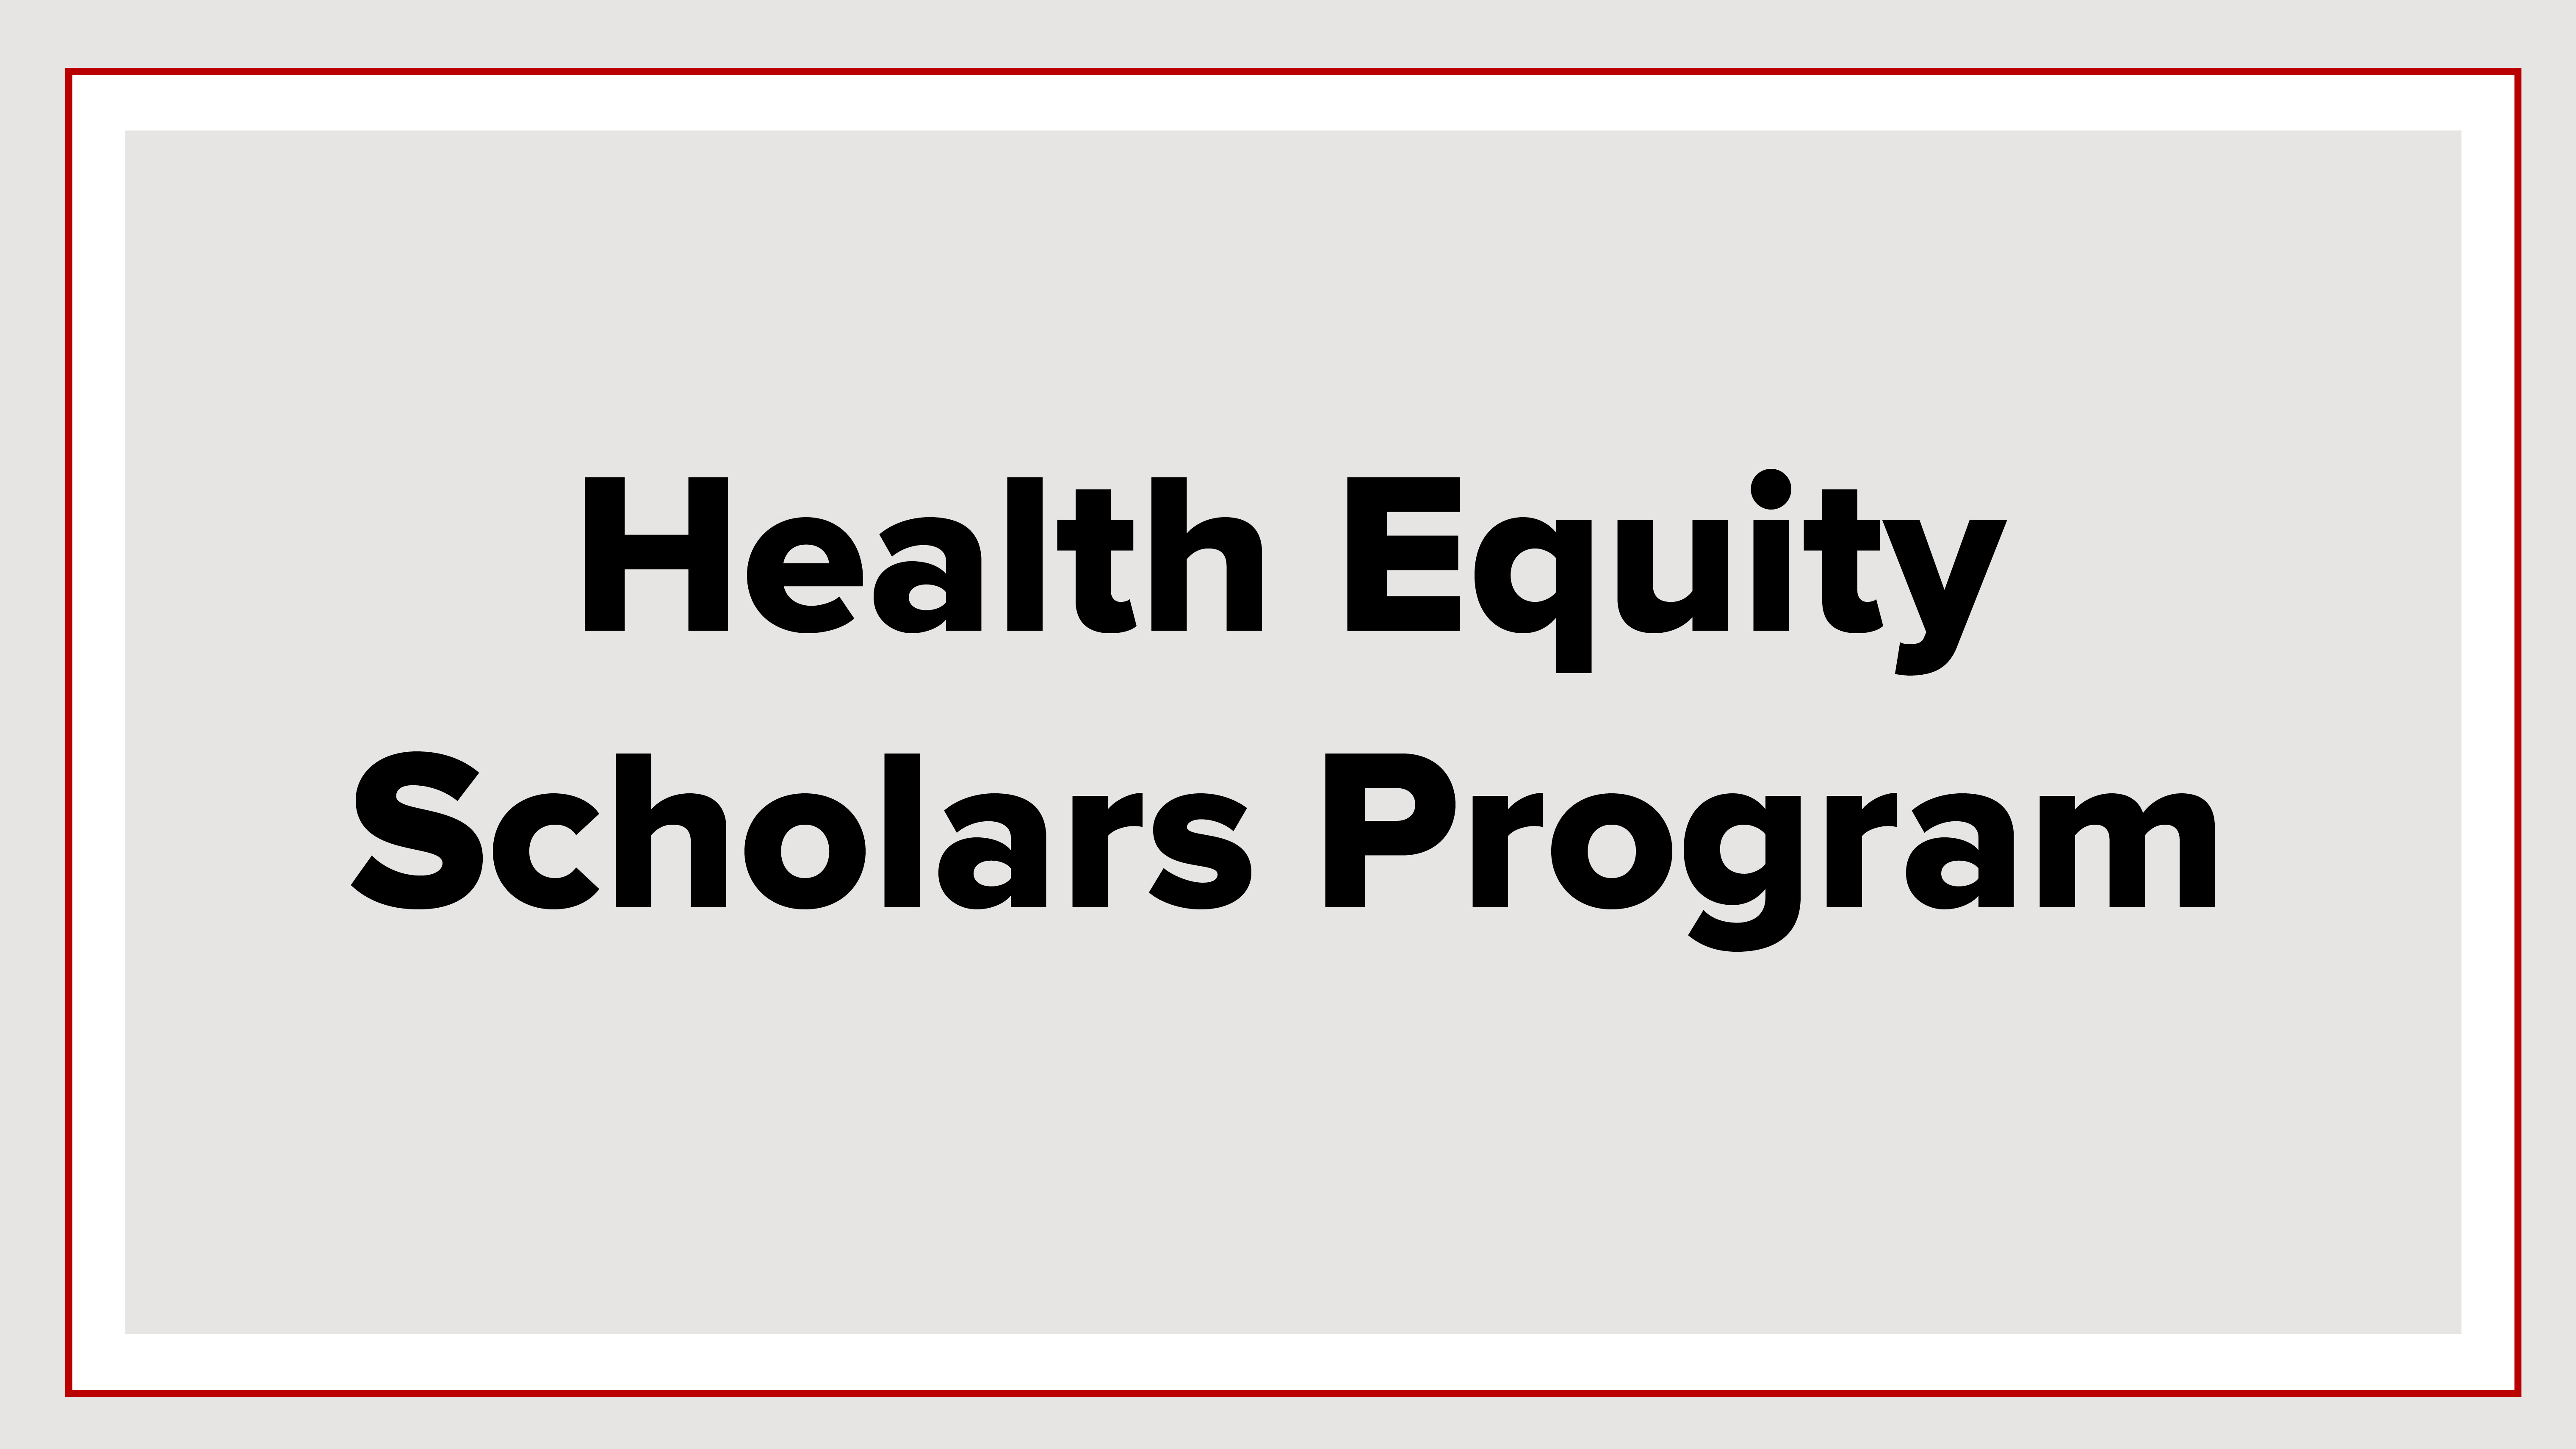 Inaugural cohort of new Health Equity Scholars Program unveiled The